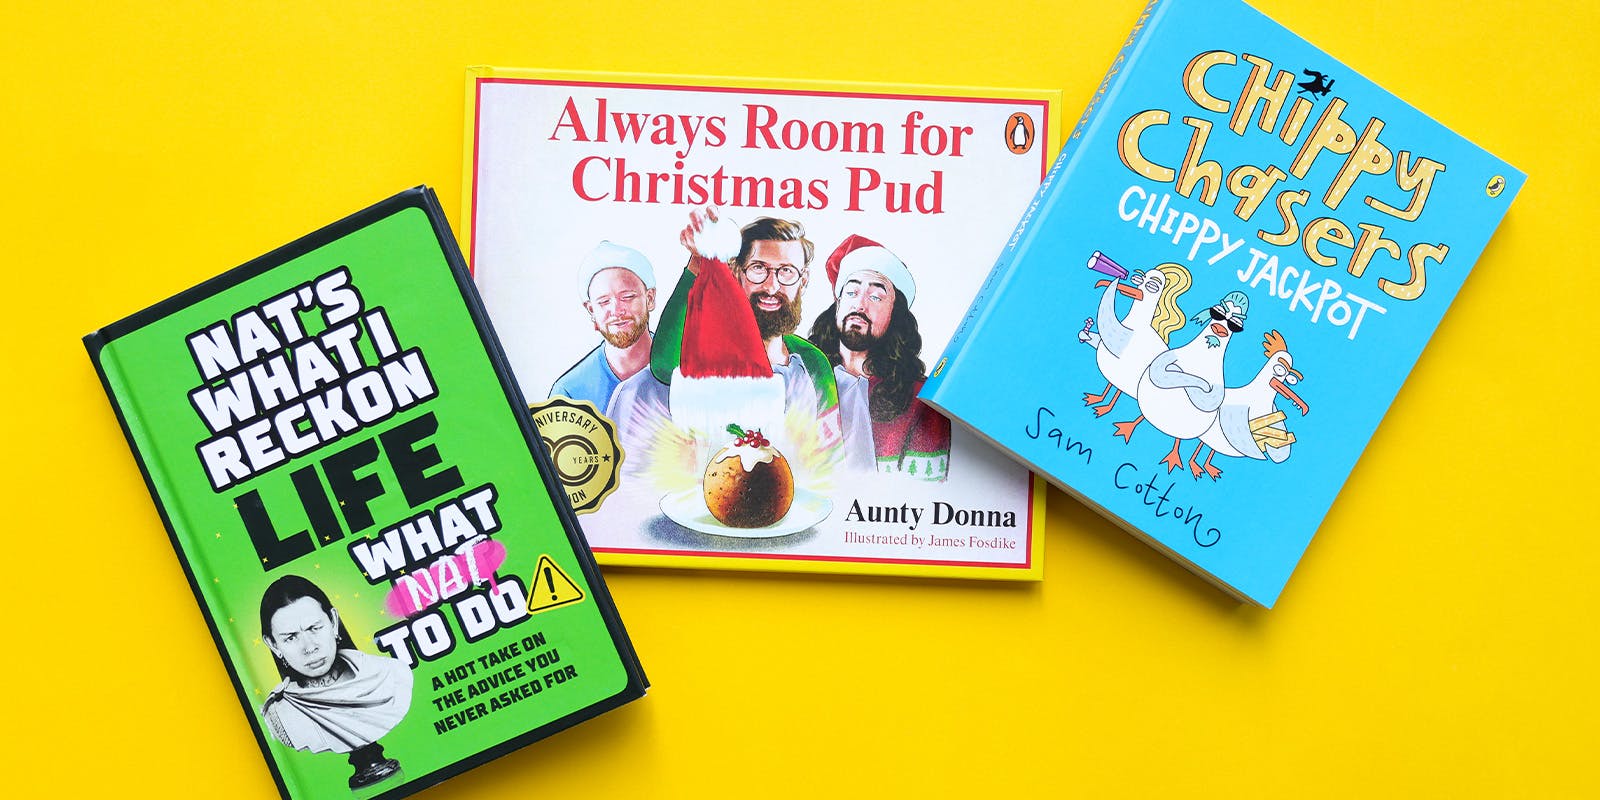 Need a laugh? These books by funny people will brighten your day - Penguin  Books Australia